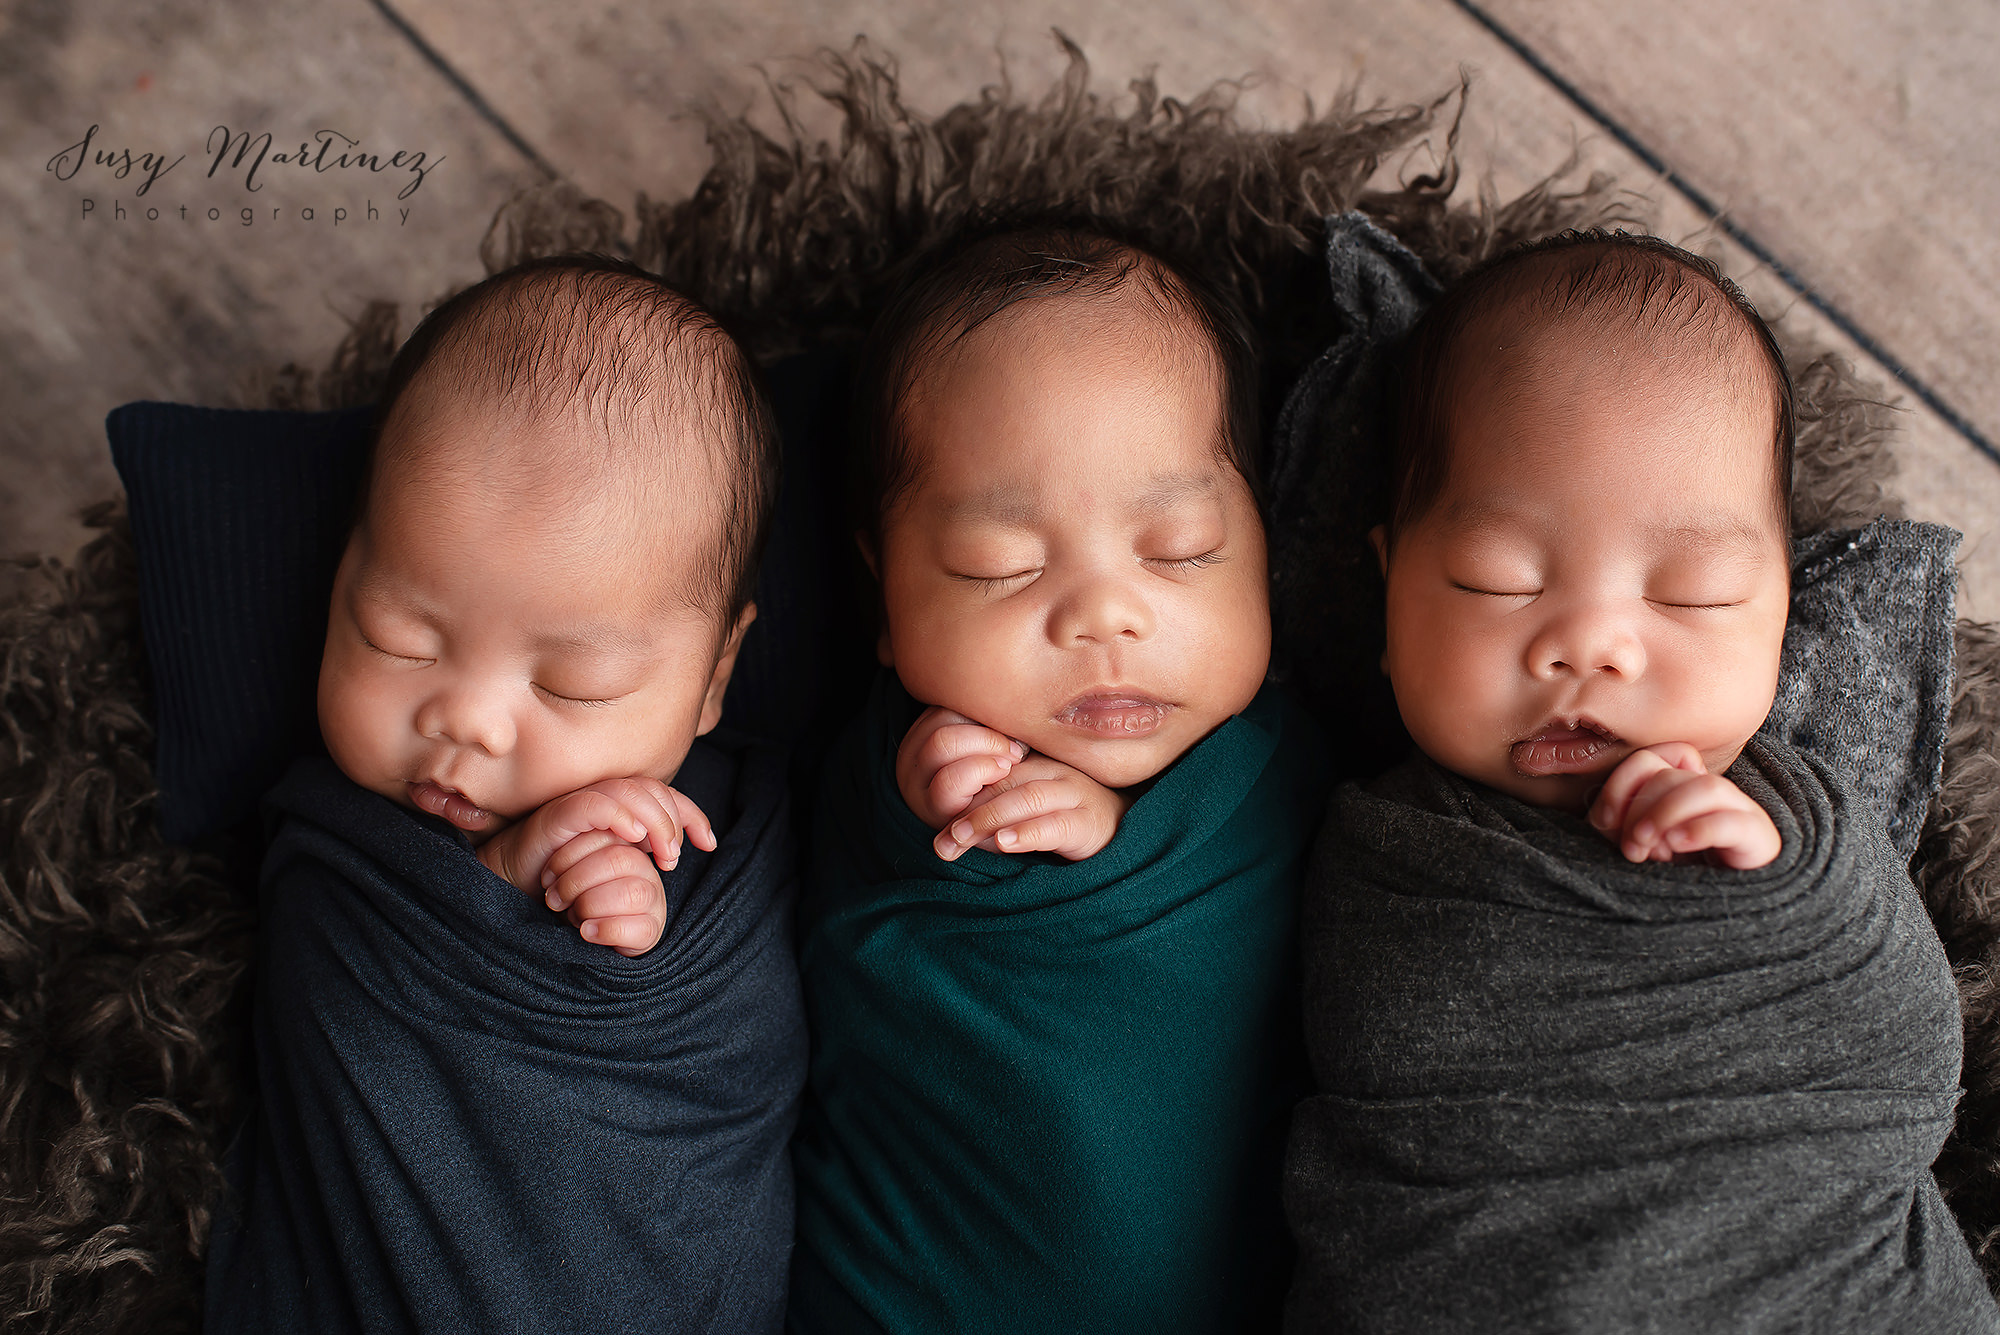 newborn session with triplets with dark color scheme photographed by Susy Martinez Photography